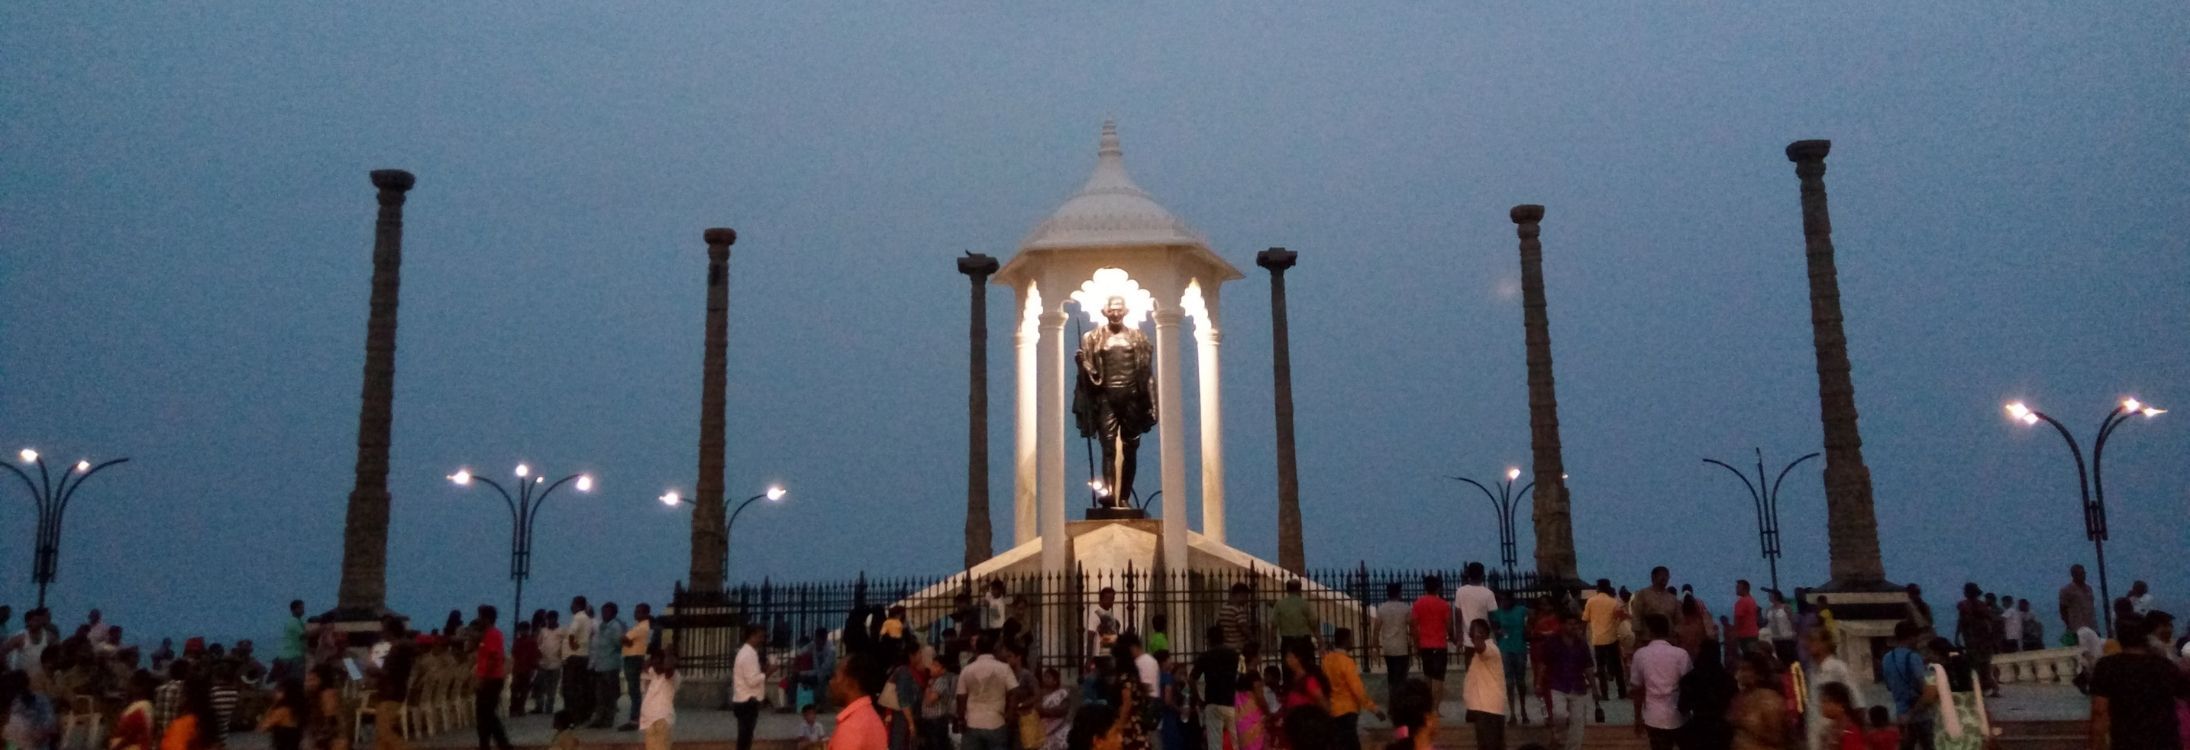 Soul Searching In The Heart Of Pondicherry